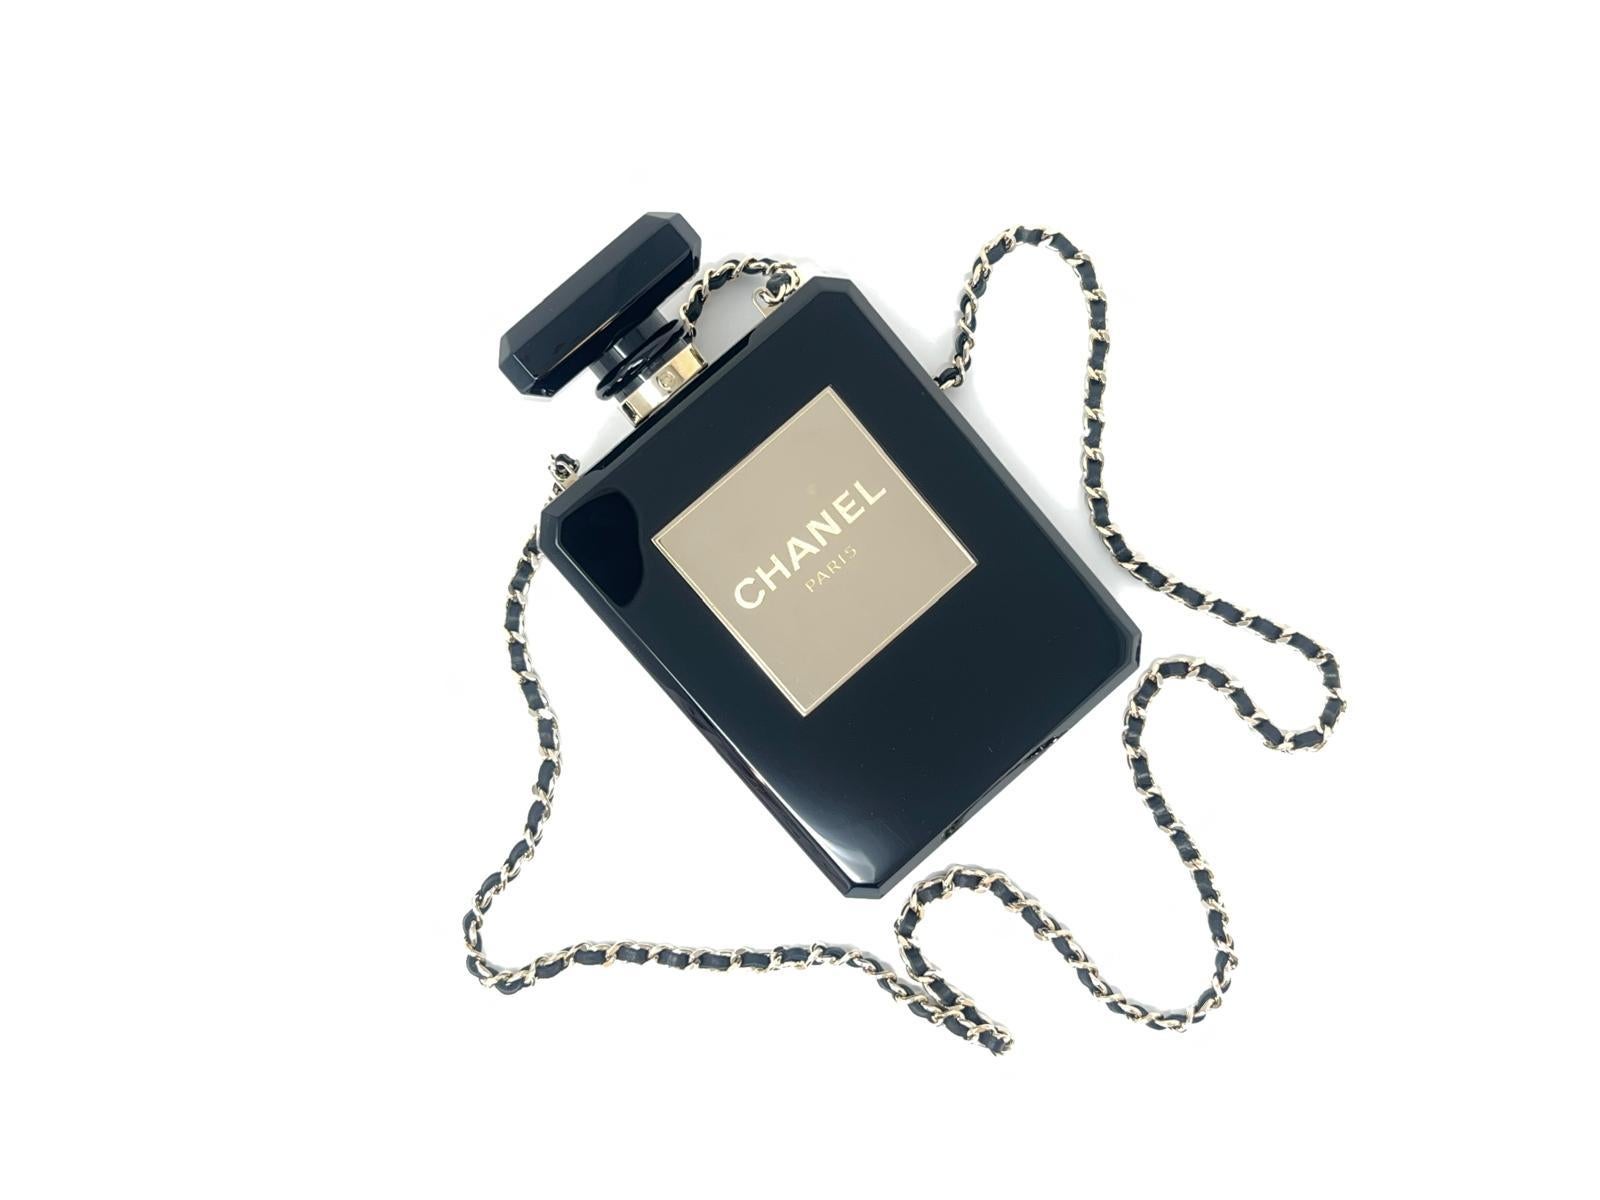 Chanel N5 Black Perfume Bottle Minaudière Cruise Collection 2013  For Sale 8